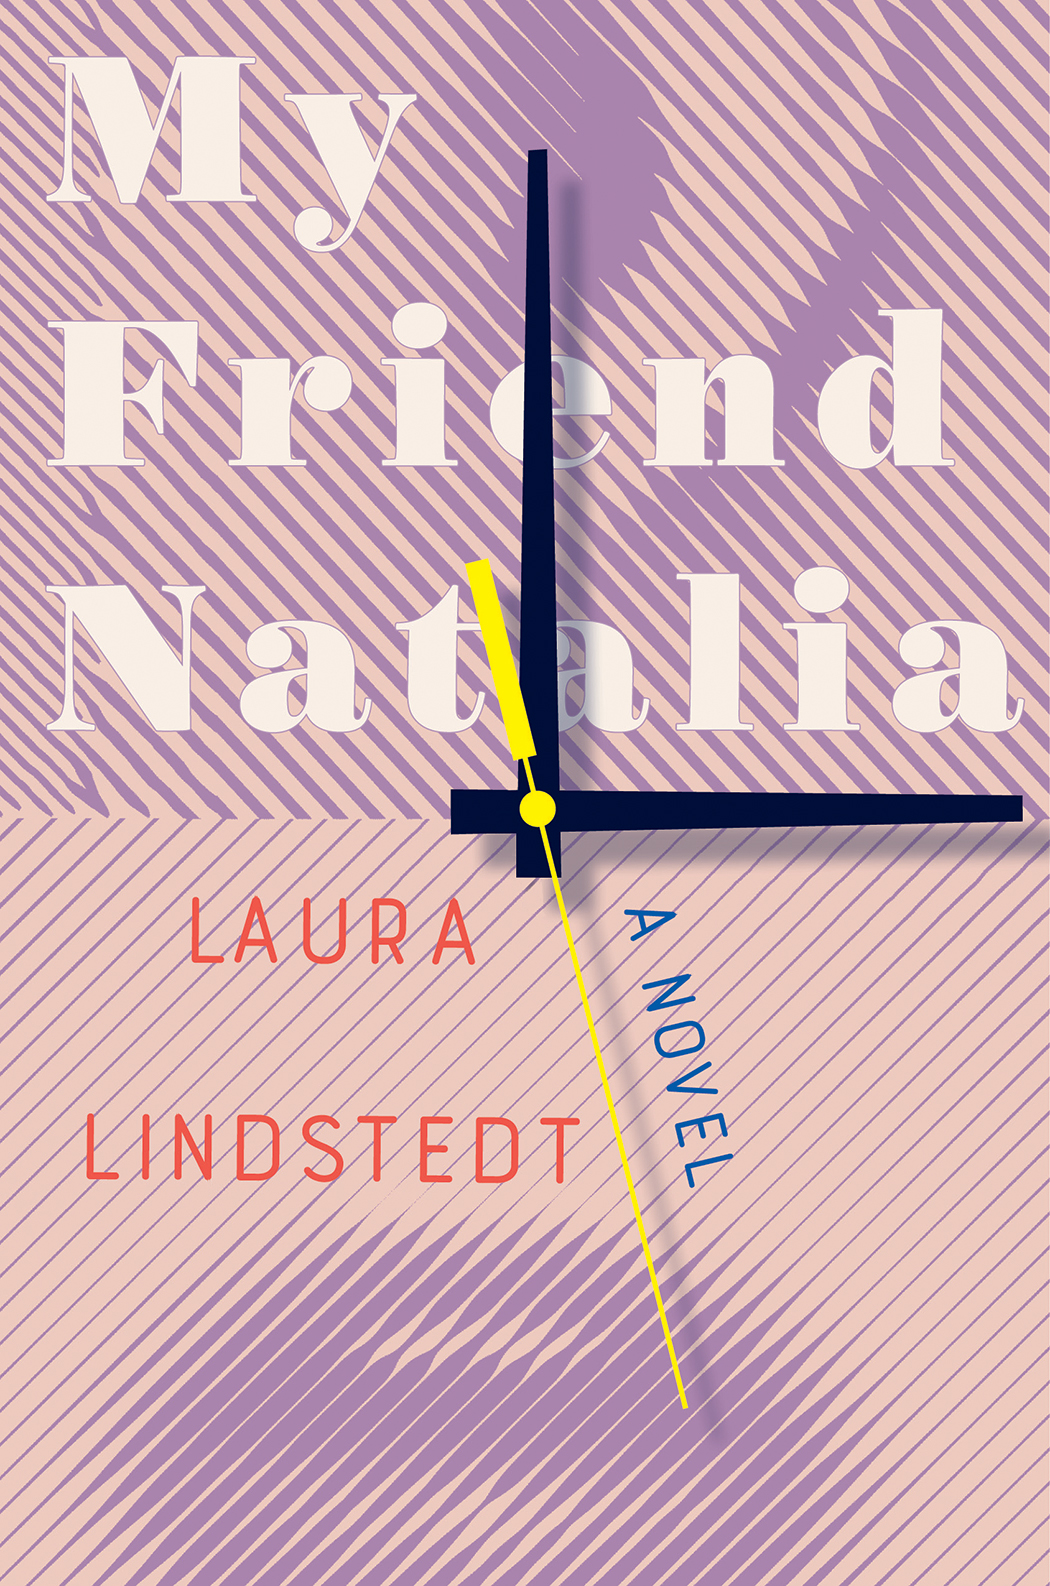 Laura Lindstedt's My Friend Natalia book cover